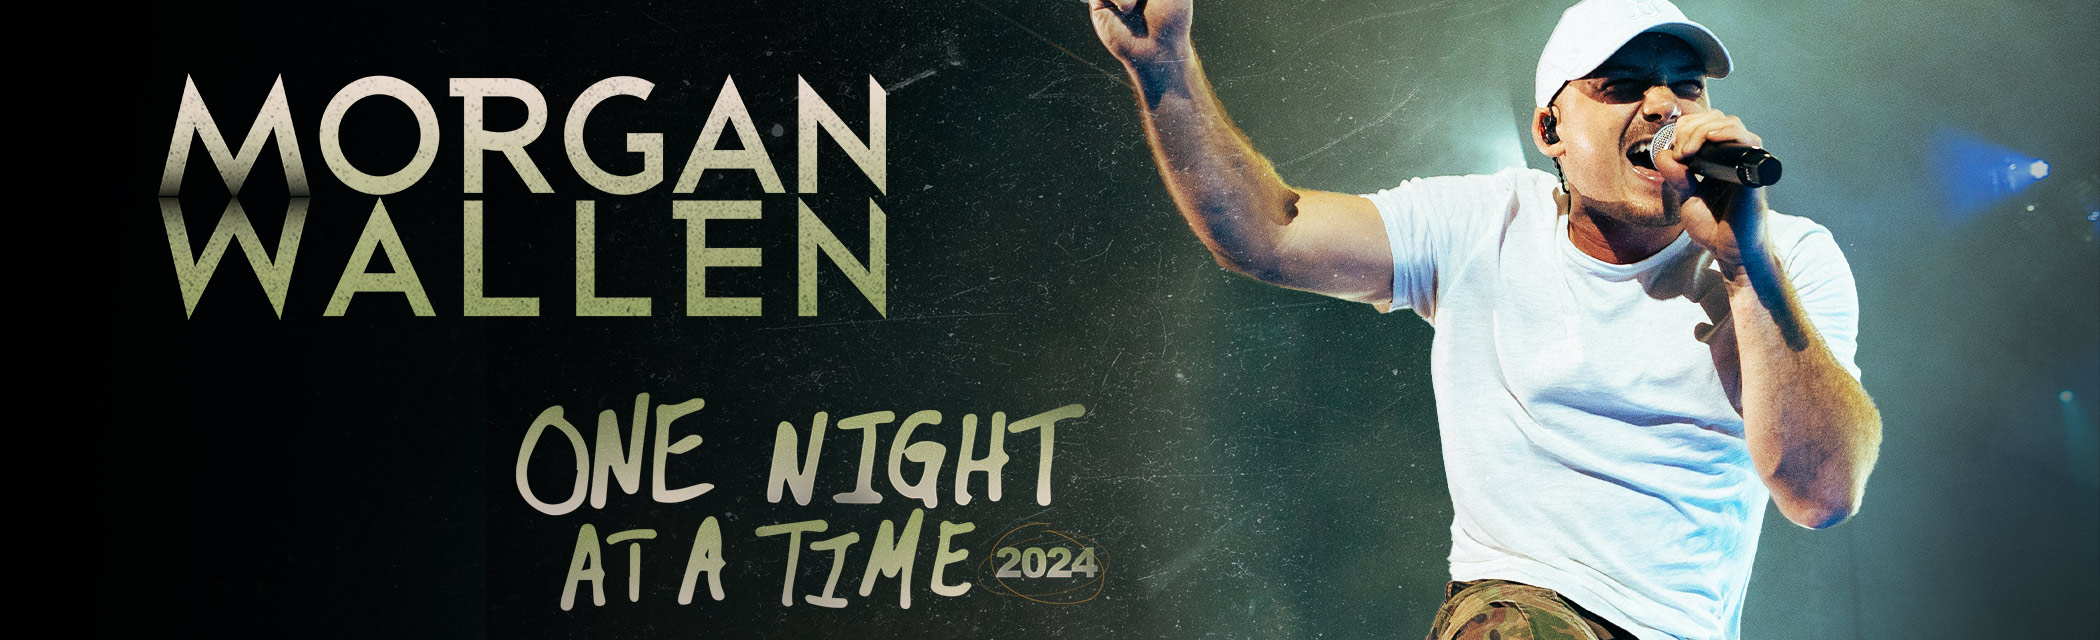 One Night At A Time 2024